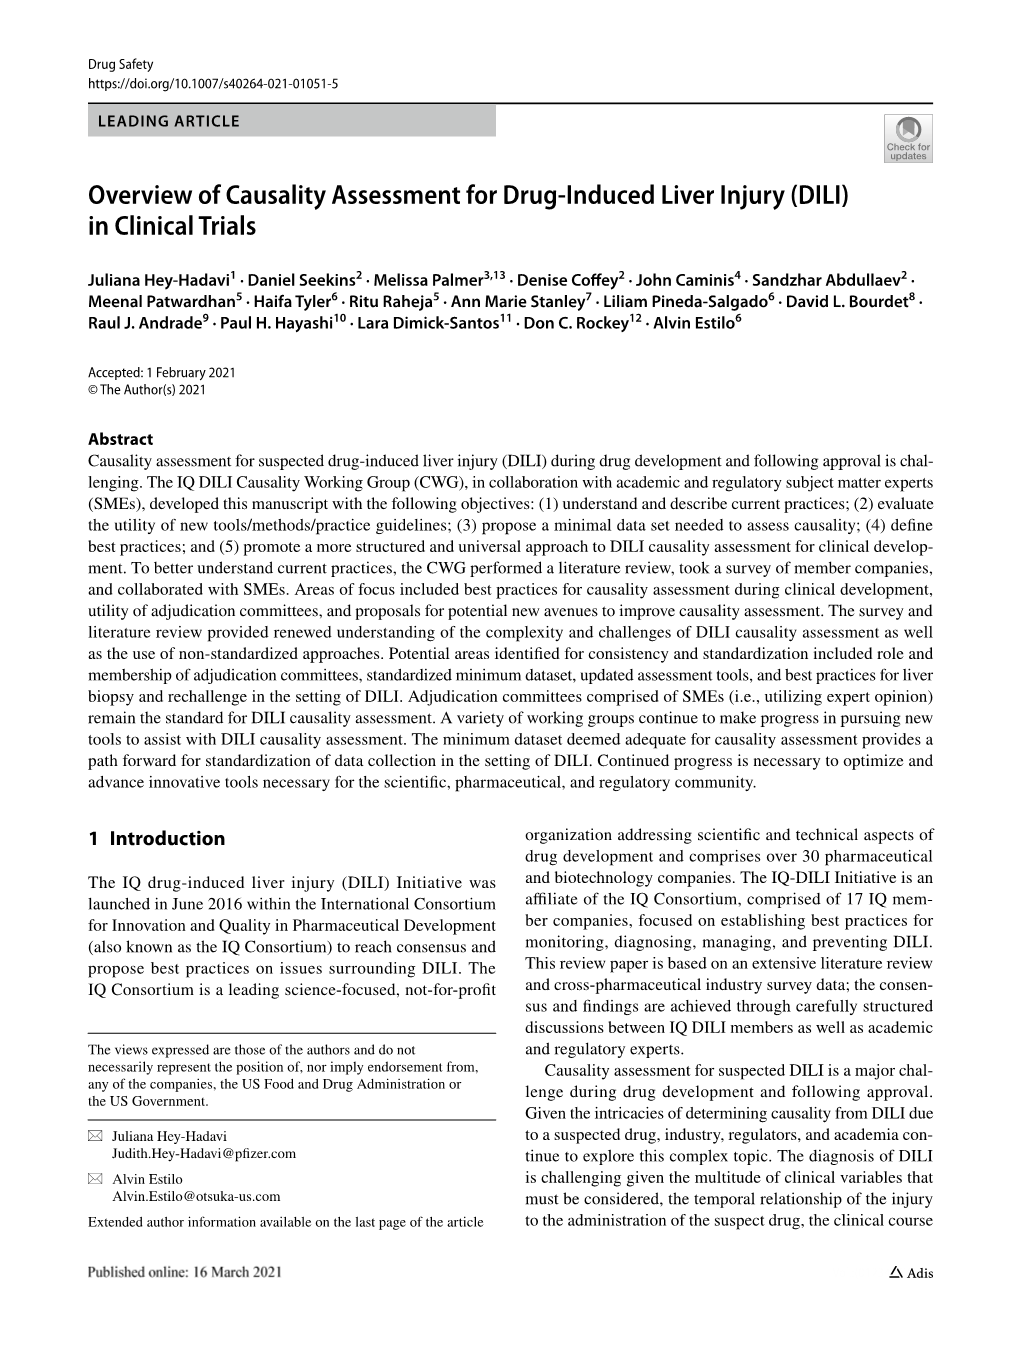 Overview of Causality Assessment for Drug-Induced Liver Injury (DILI) In